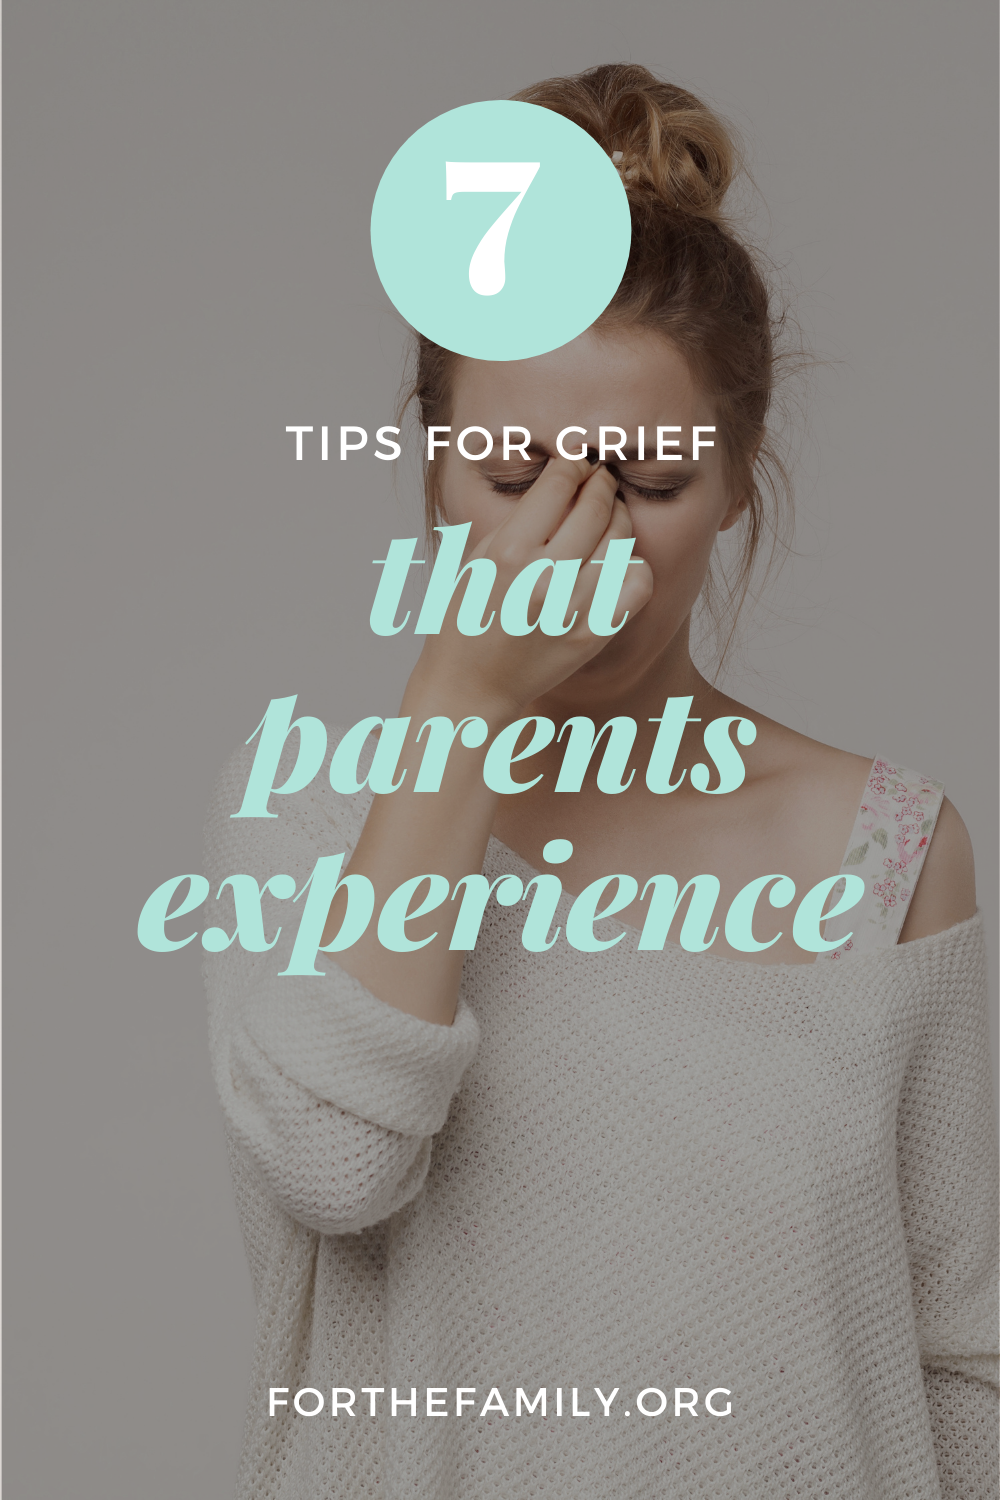 7 Tips for Grief That Parents Experience